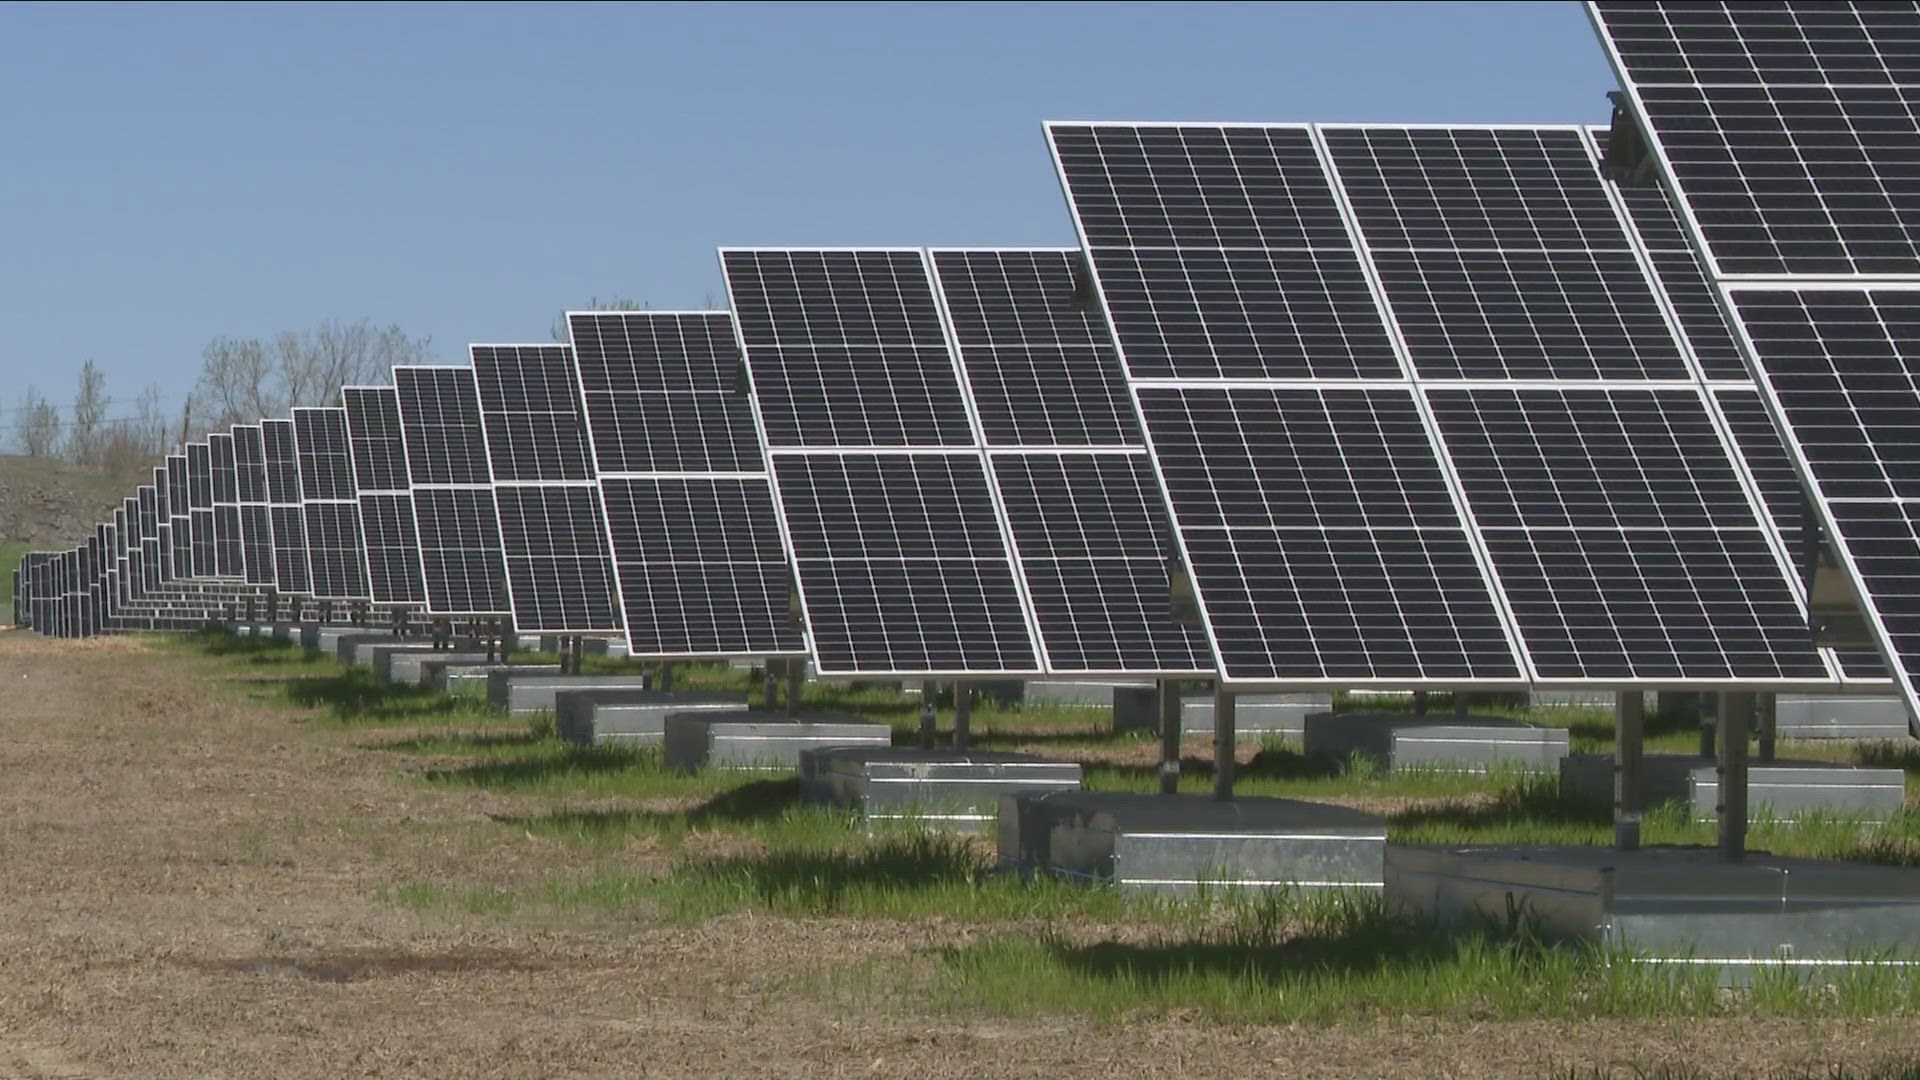 The Broadway Solar Farm started generating and feeding up to five megawatts of power to NYSEG in March.